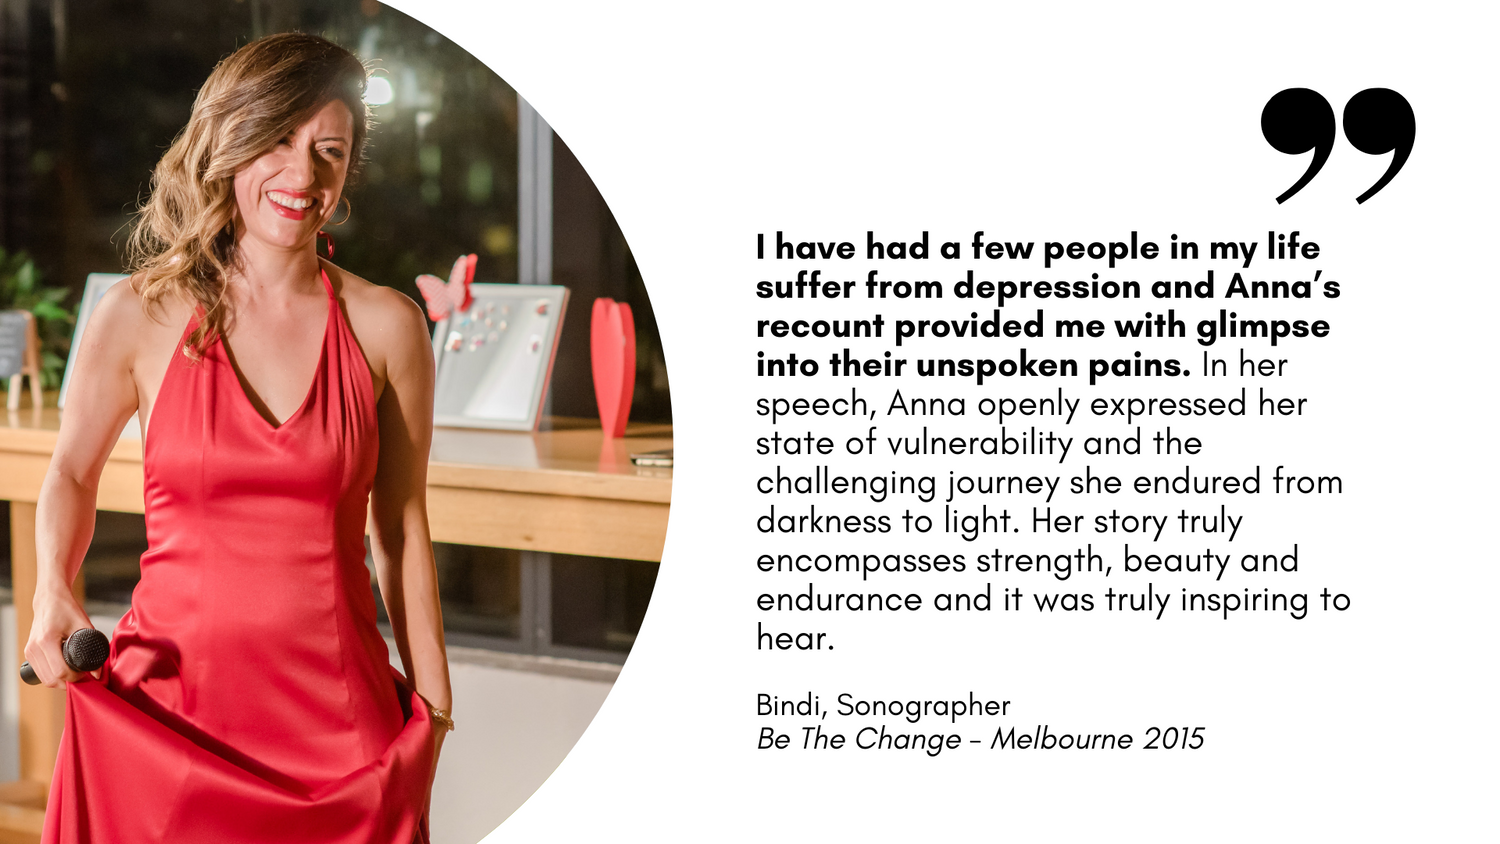 Bindi shares her review of Anna Krjatian's speech at the "Be The Change" event in Melbourne. In the image Anna is holding up her red gown and a microphone in one hand, smiling at the audience.